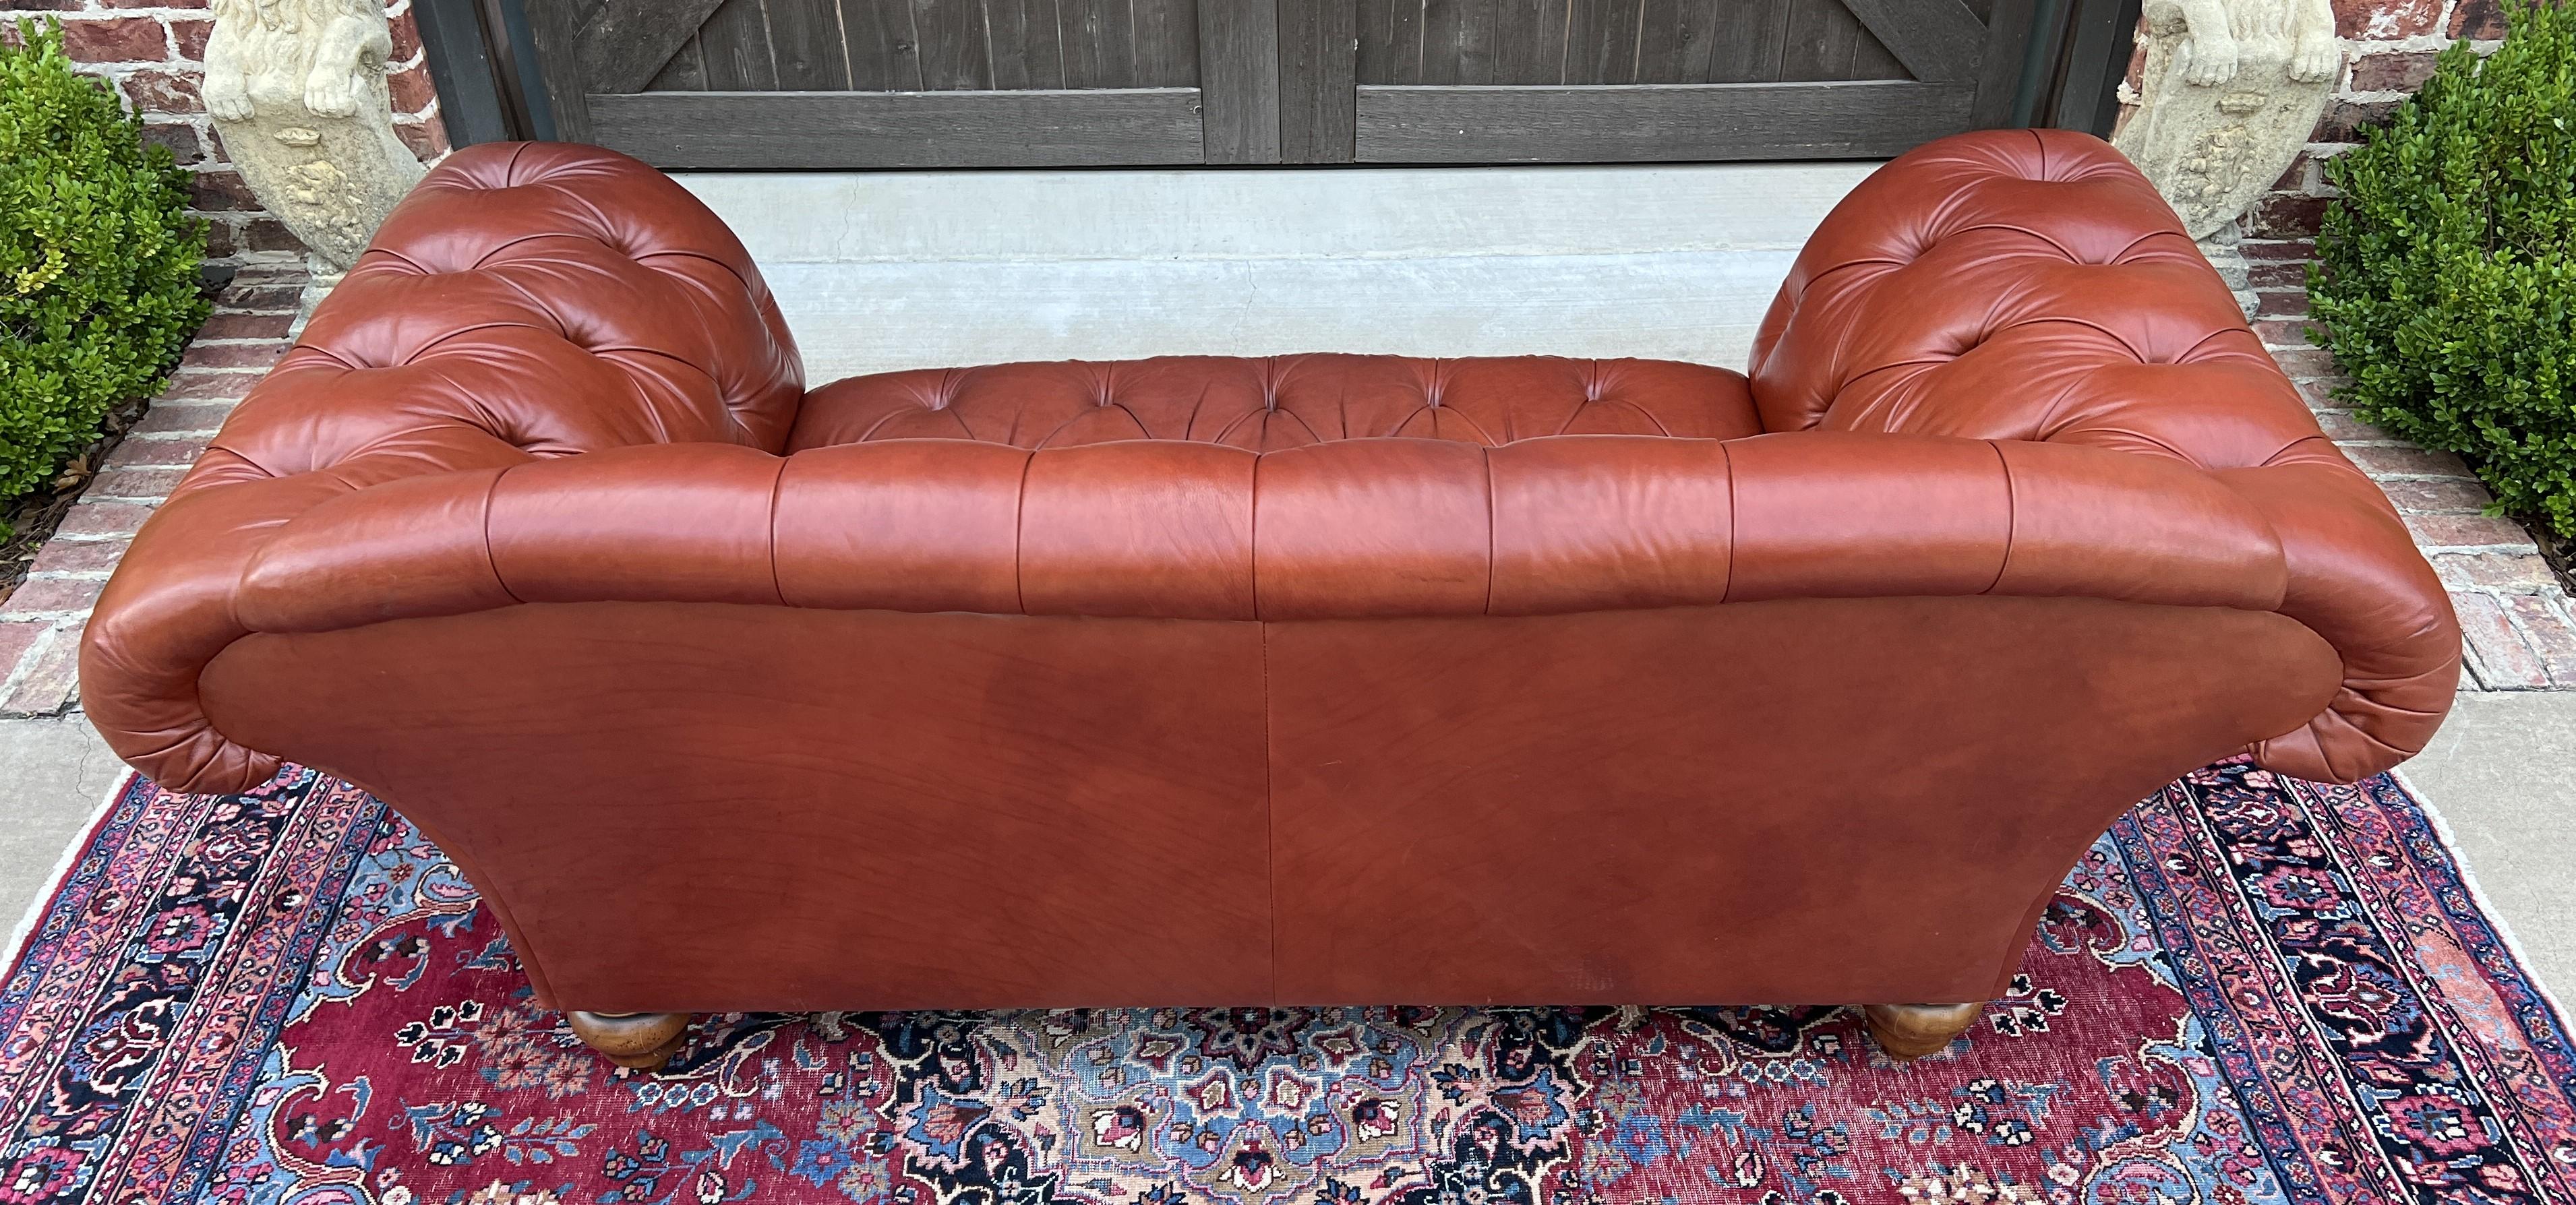 Vintage English Chesterfield Leather Tufted Sofa Brown Terra Cotta Mid Century For Sale 11